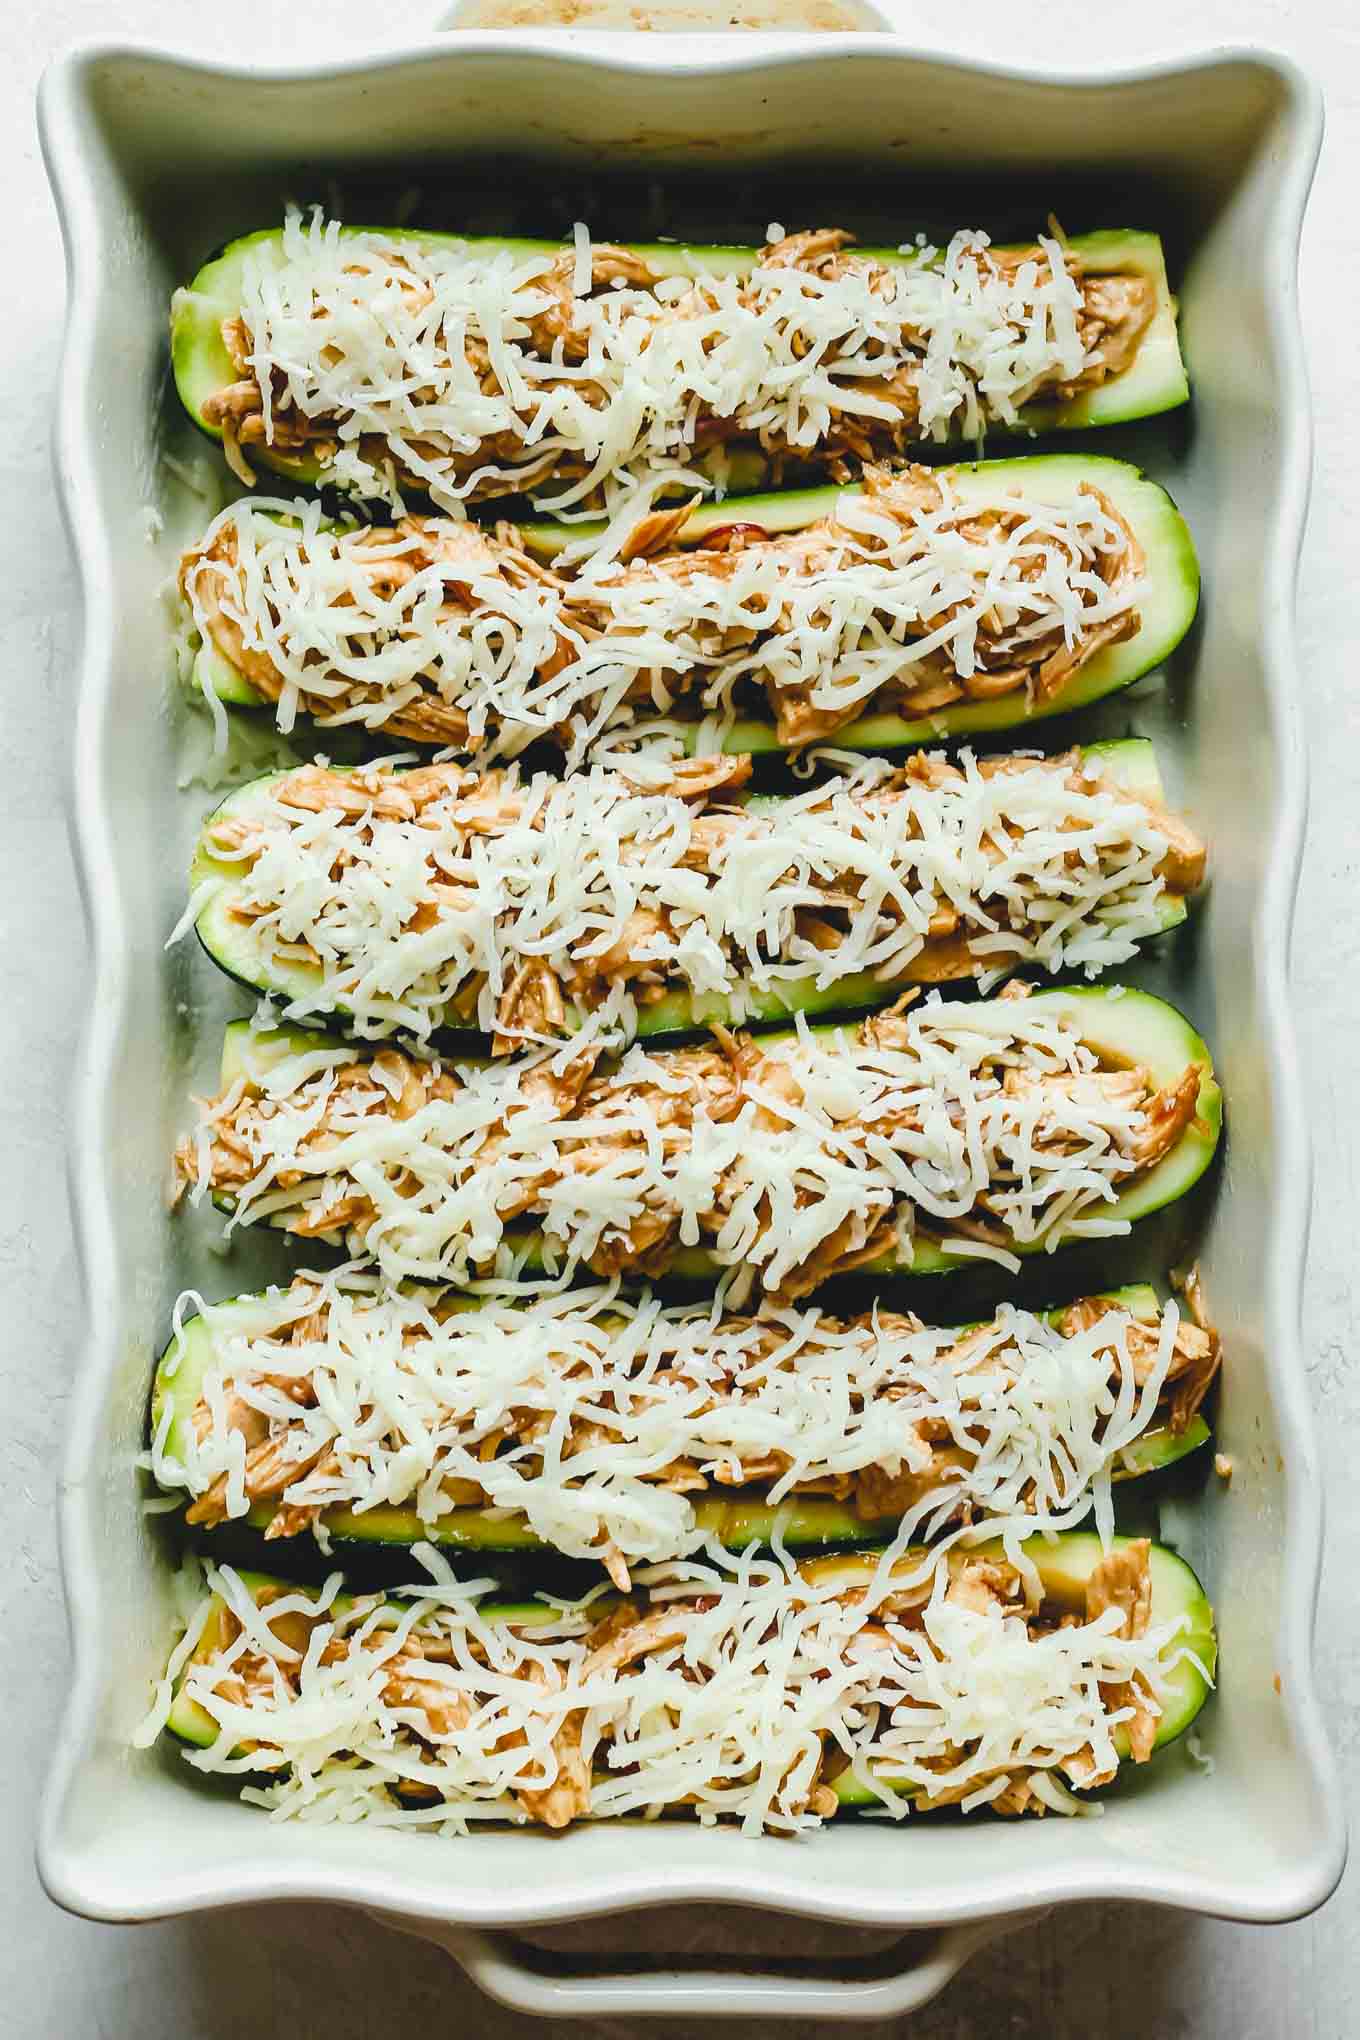 Zucchini boats stuffed and ready for the oven